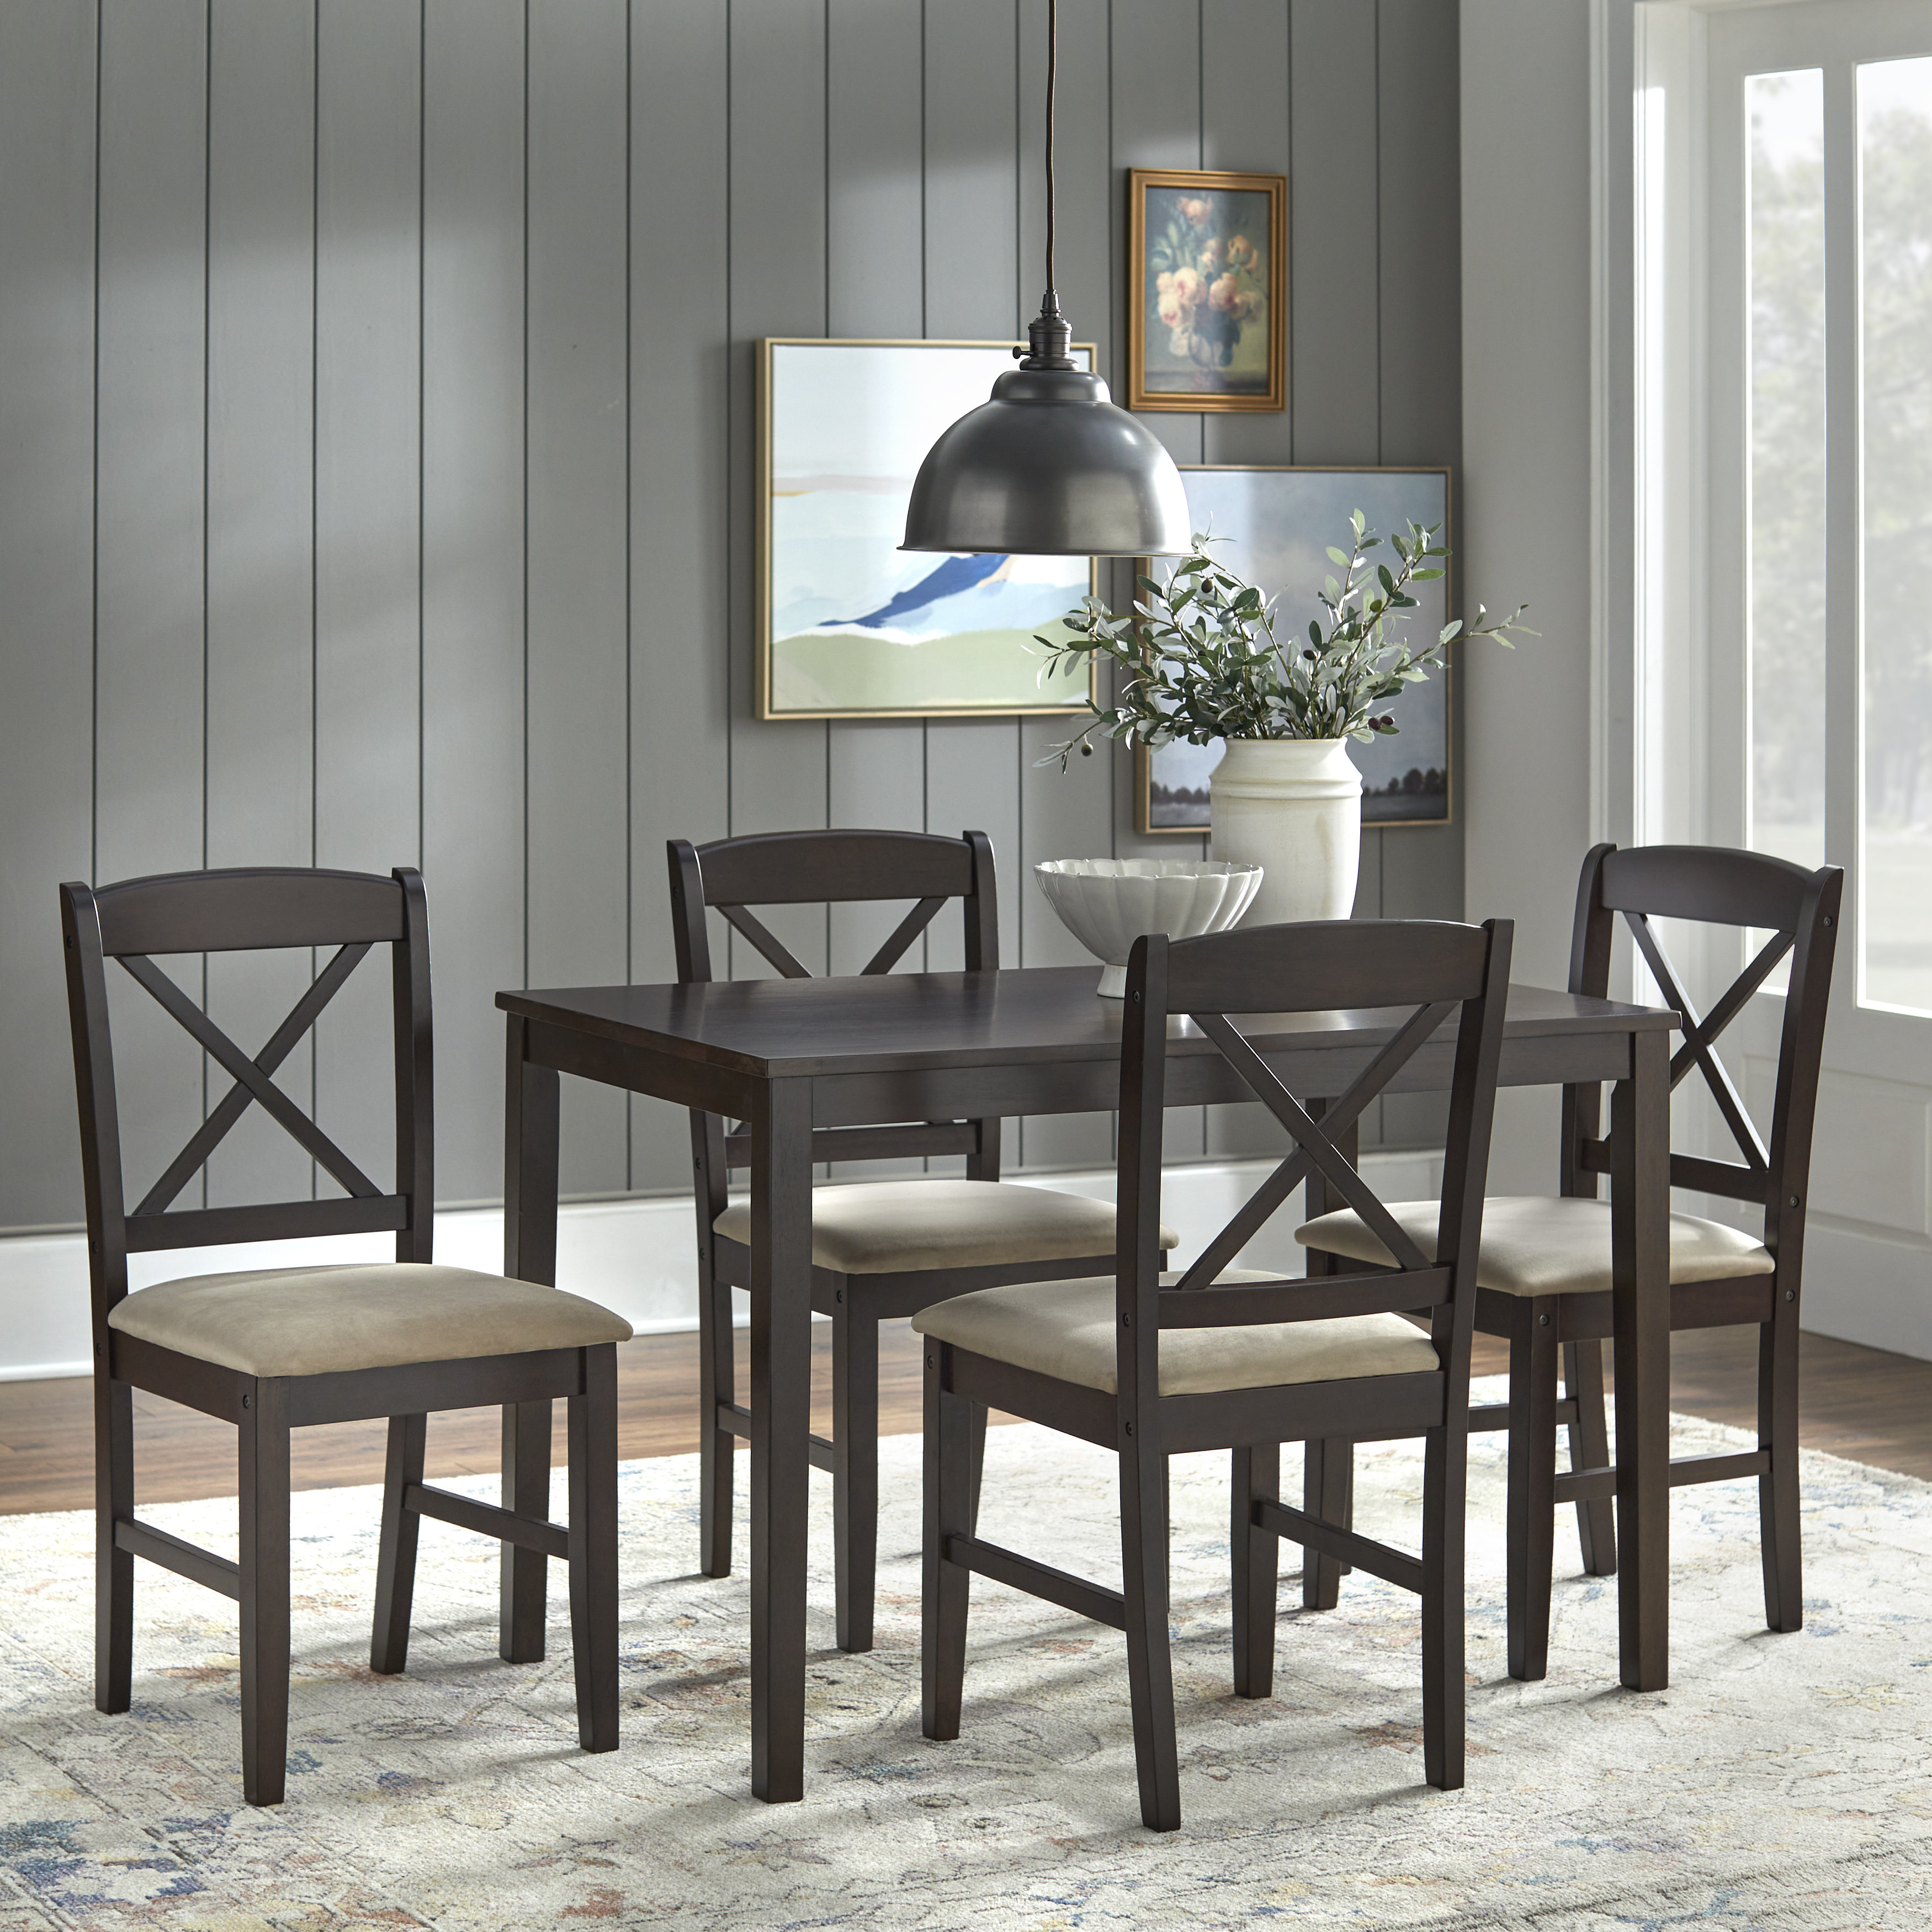 5 Piece Kitchen & Dining Room Sets You'll Love - Wayfair Canada